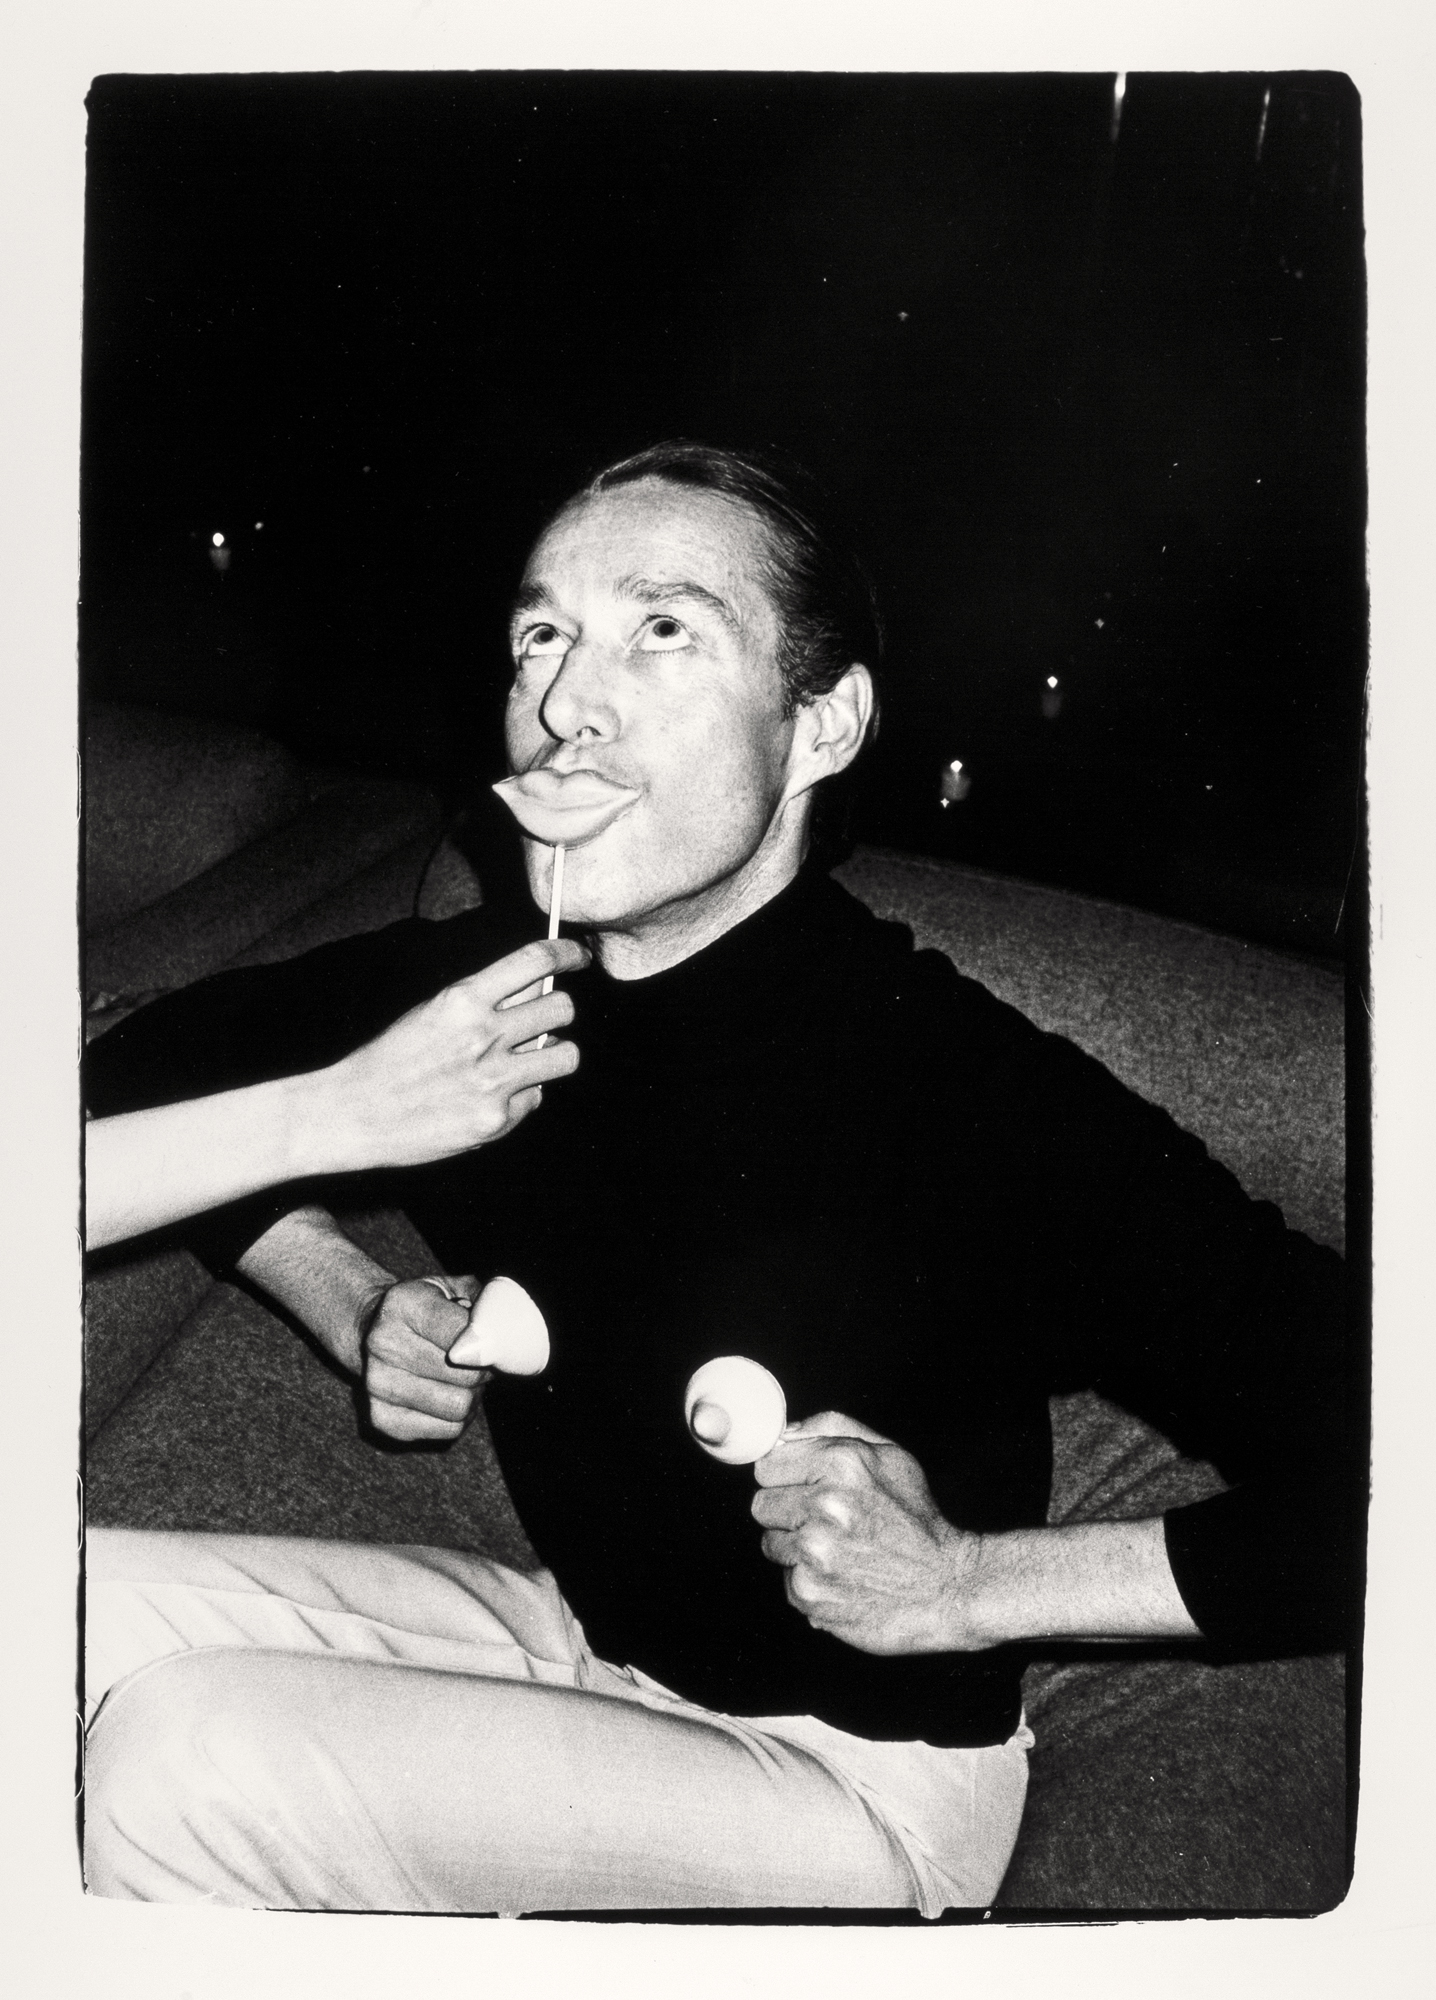 Andy Warhol, born Pittsburgh, Pennsylvania 1928, died New York City, New York 1987, <em>Halston at home, New York</em>, no. 7 from the portfolio <em>Photographs</em>, c.1976-79; published 1980, New York, United States, gelatin silver photograph, 42.2 x 29.4 cm (image), 50.5 x 40.8 cm (sheet); James and Diana Ramsay Fund 2020, Art Gallery of South Australia, Adelaide, © Andy Warhol Foundation for the Visual Arts, Inc. ARS/Copyright Agency